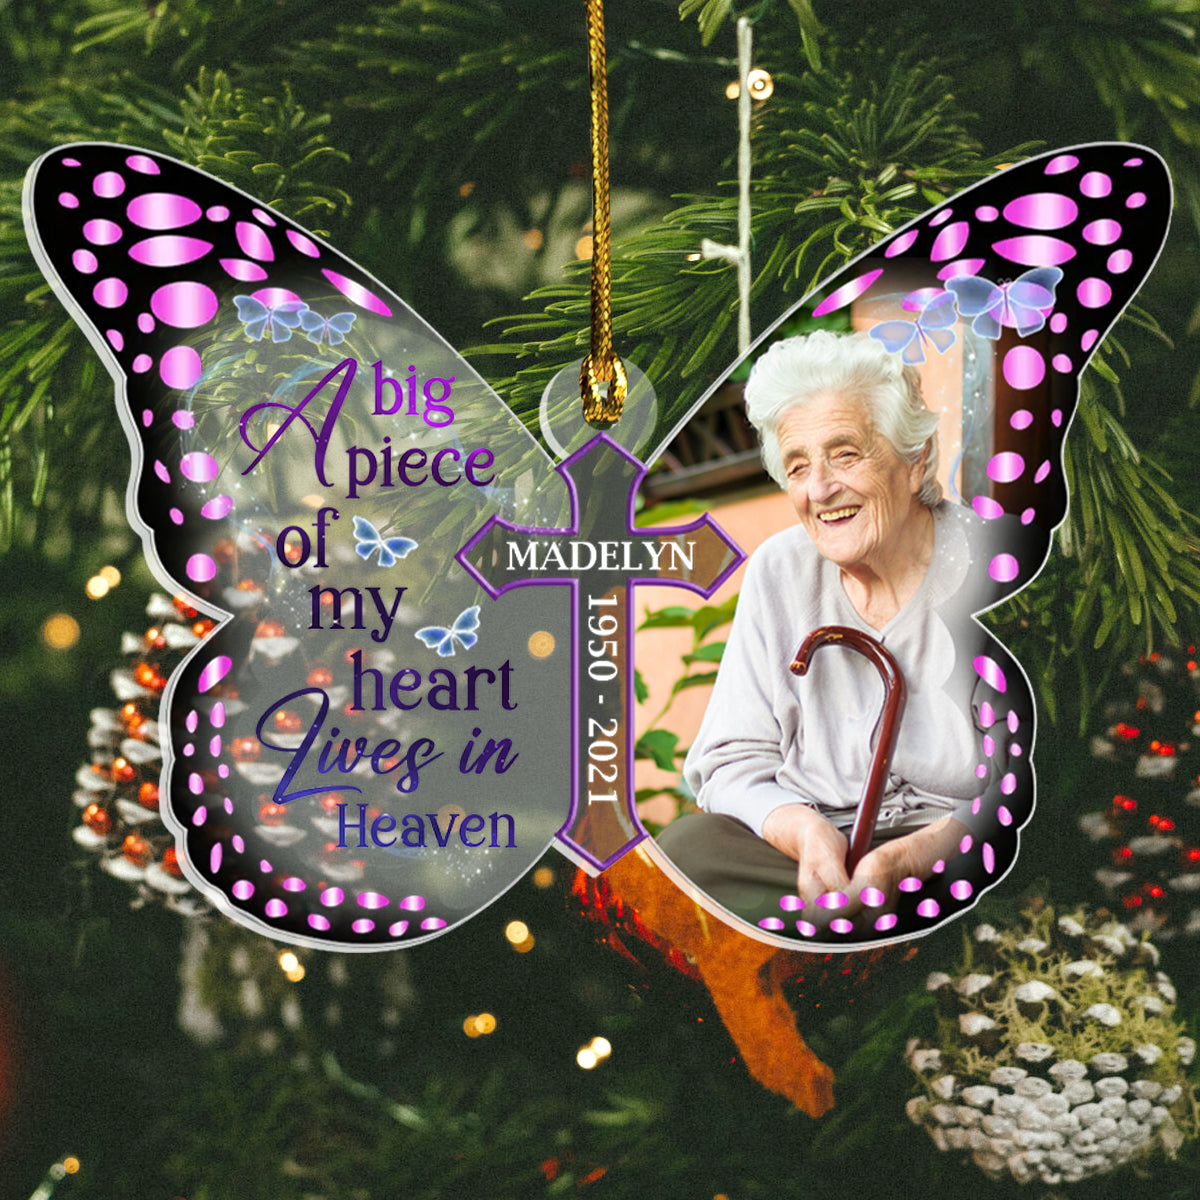 Your Wings Were Ready But My Heart Was Not Butterfly - Personalized Acrylic Ornament - Memorial, Christmas Gift